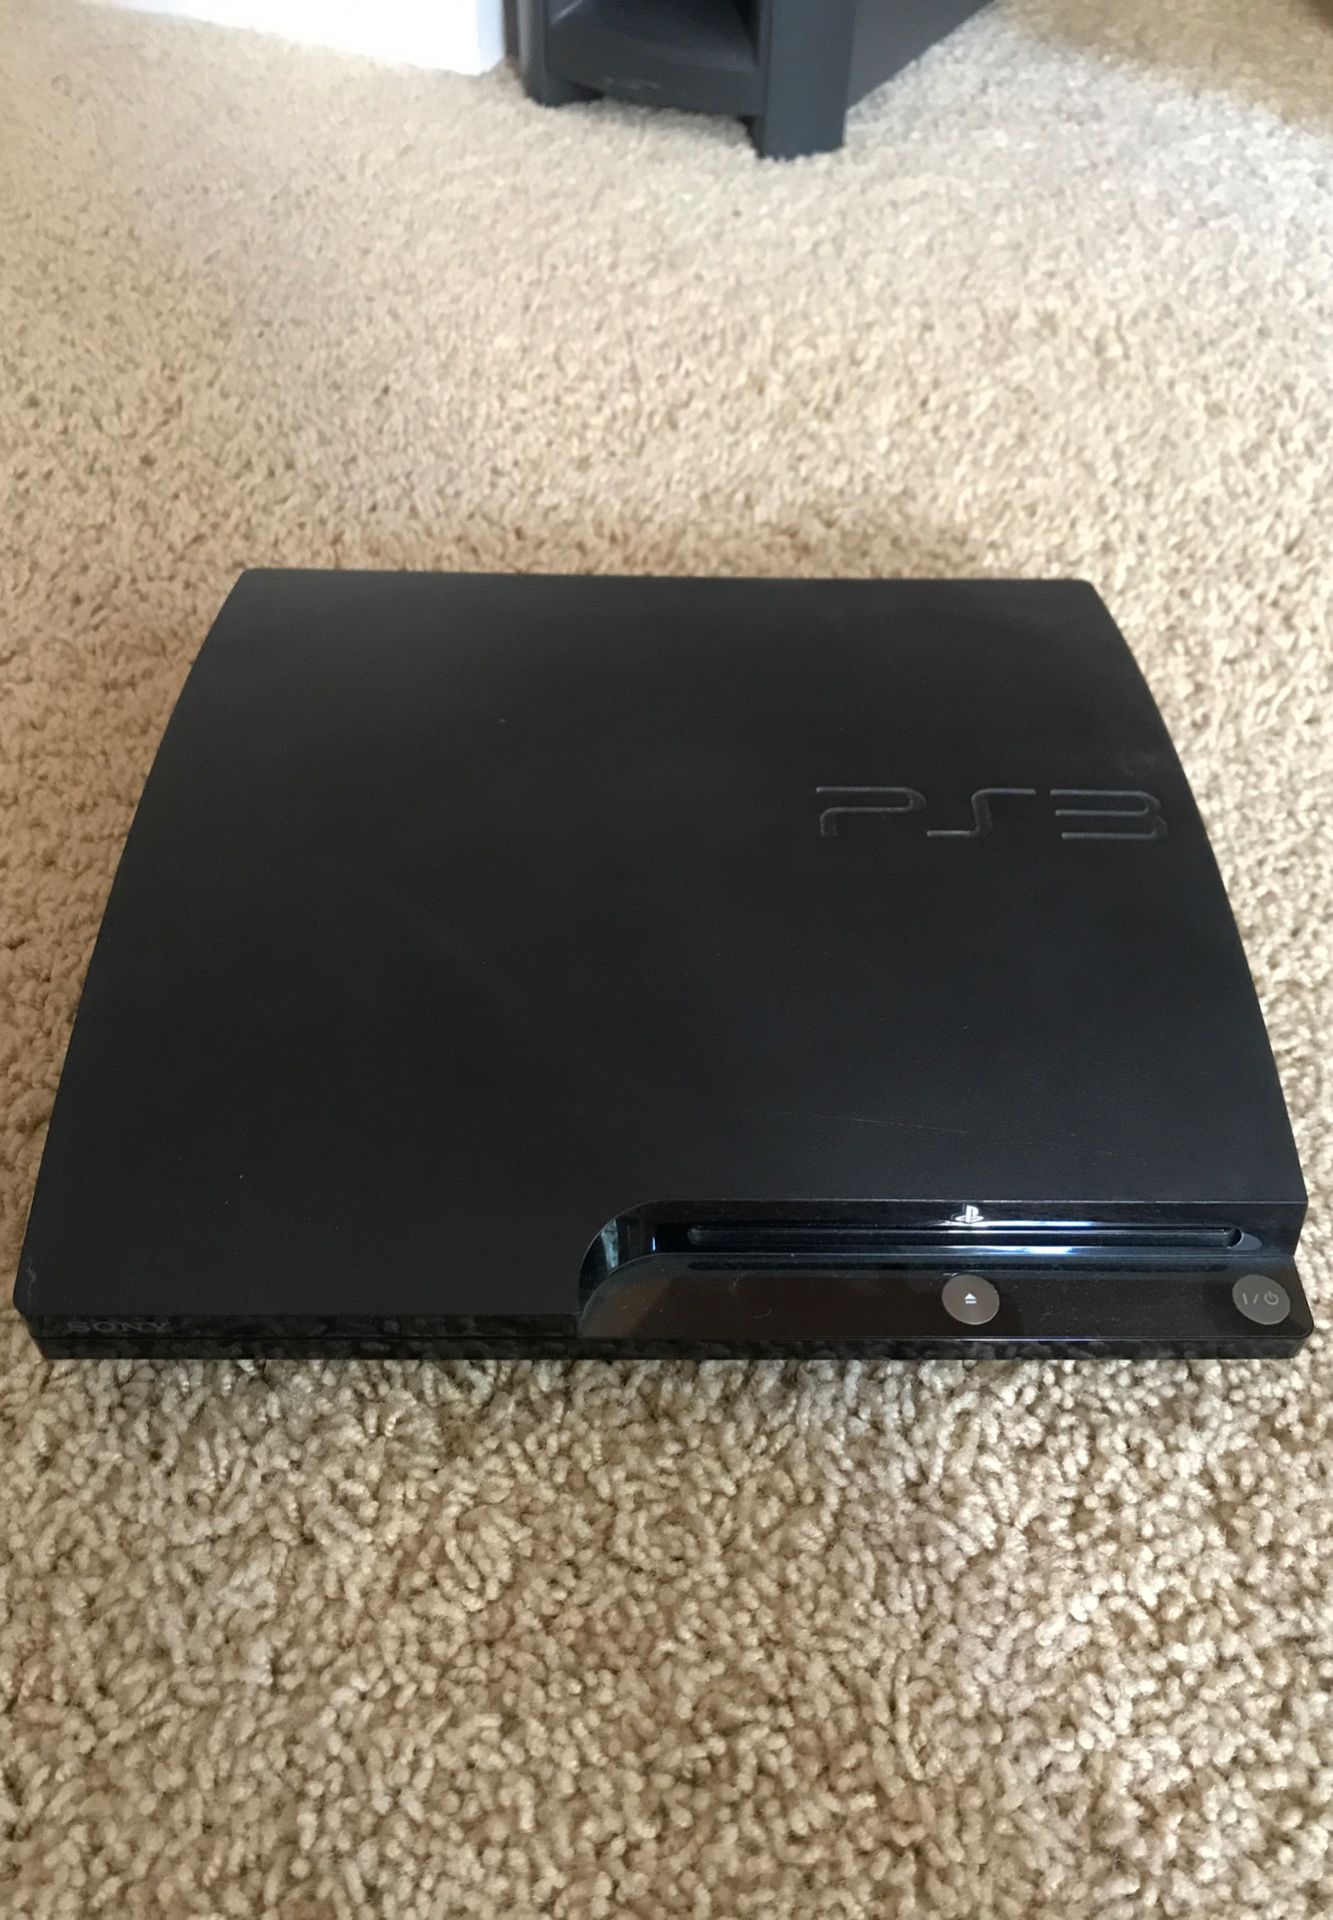 PS3 with one controller and two games